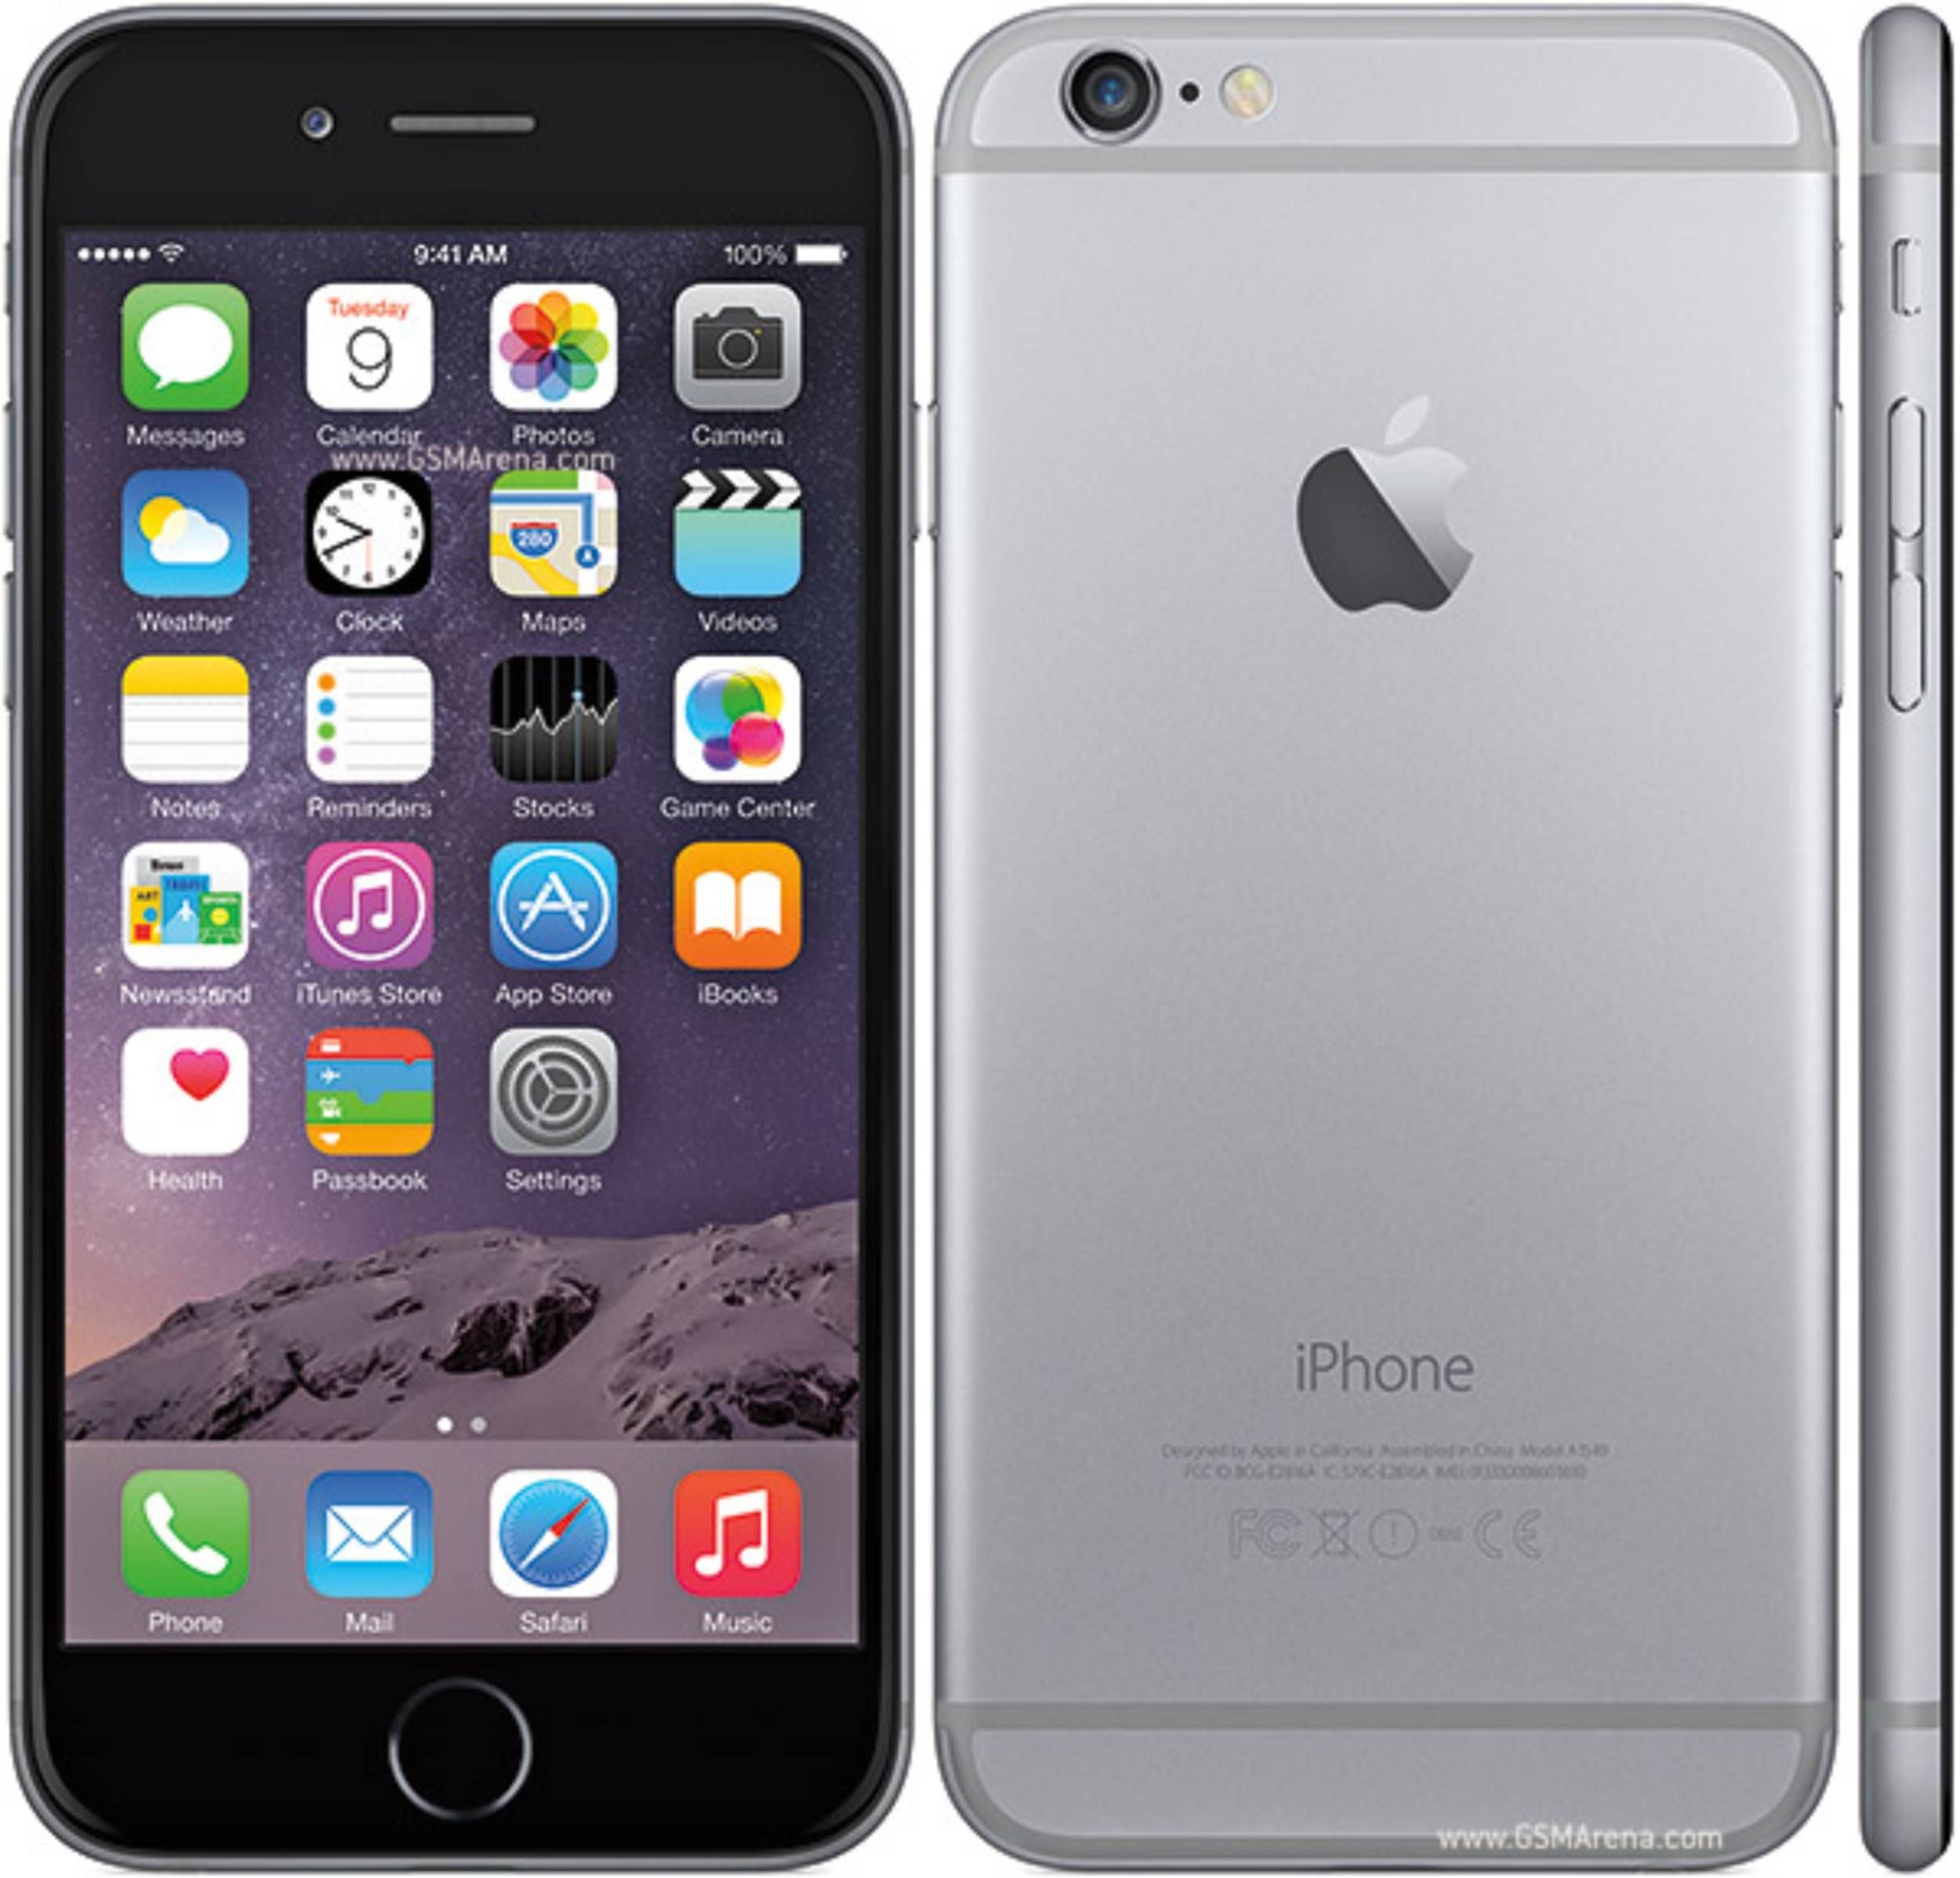 What is Apple iPhone 6 Screen Replacement Cost in Kenya?